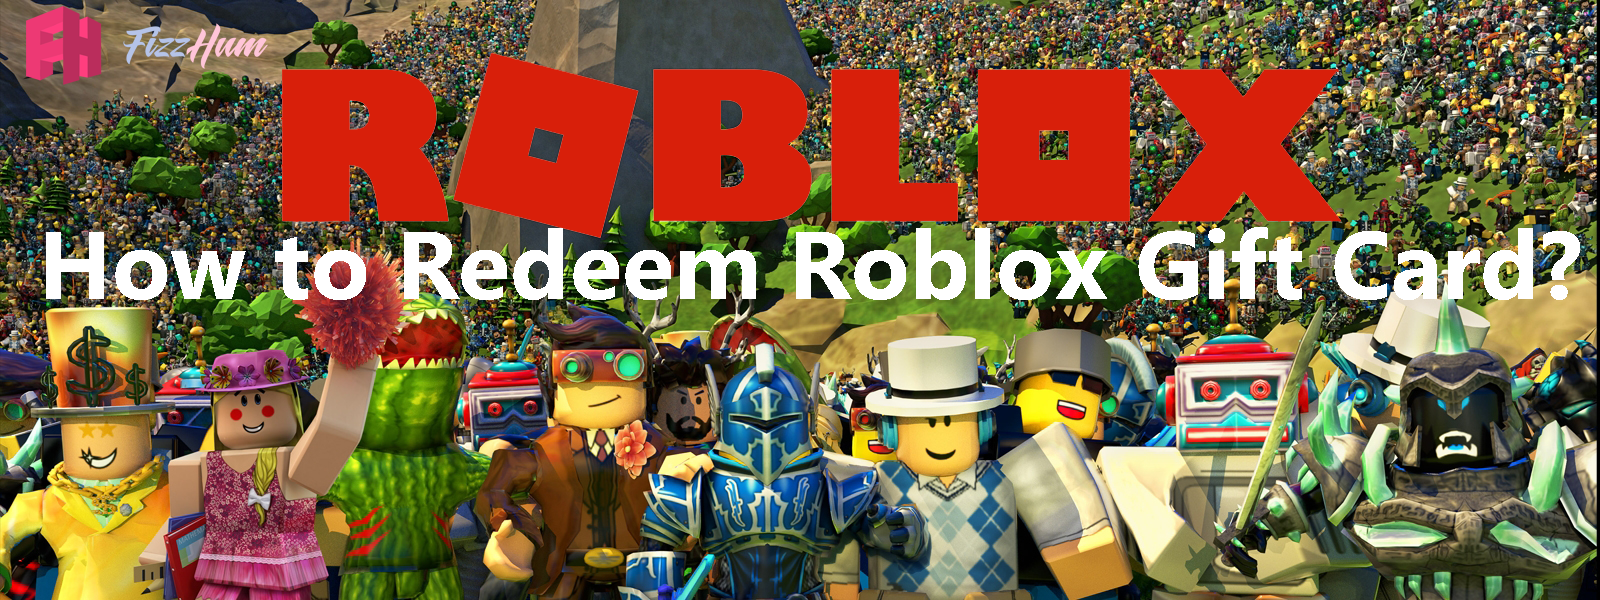 How To Redeem Roblox Gift Card Step By Step 2021 Fizzhum Com - roblox gift card redeem